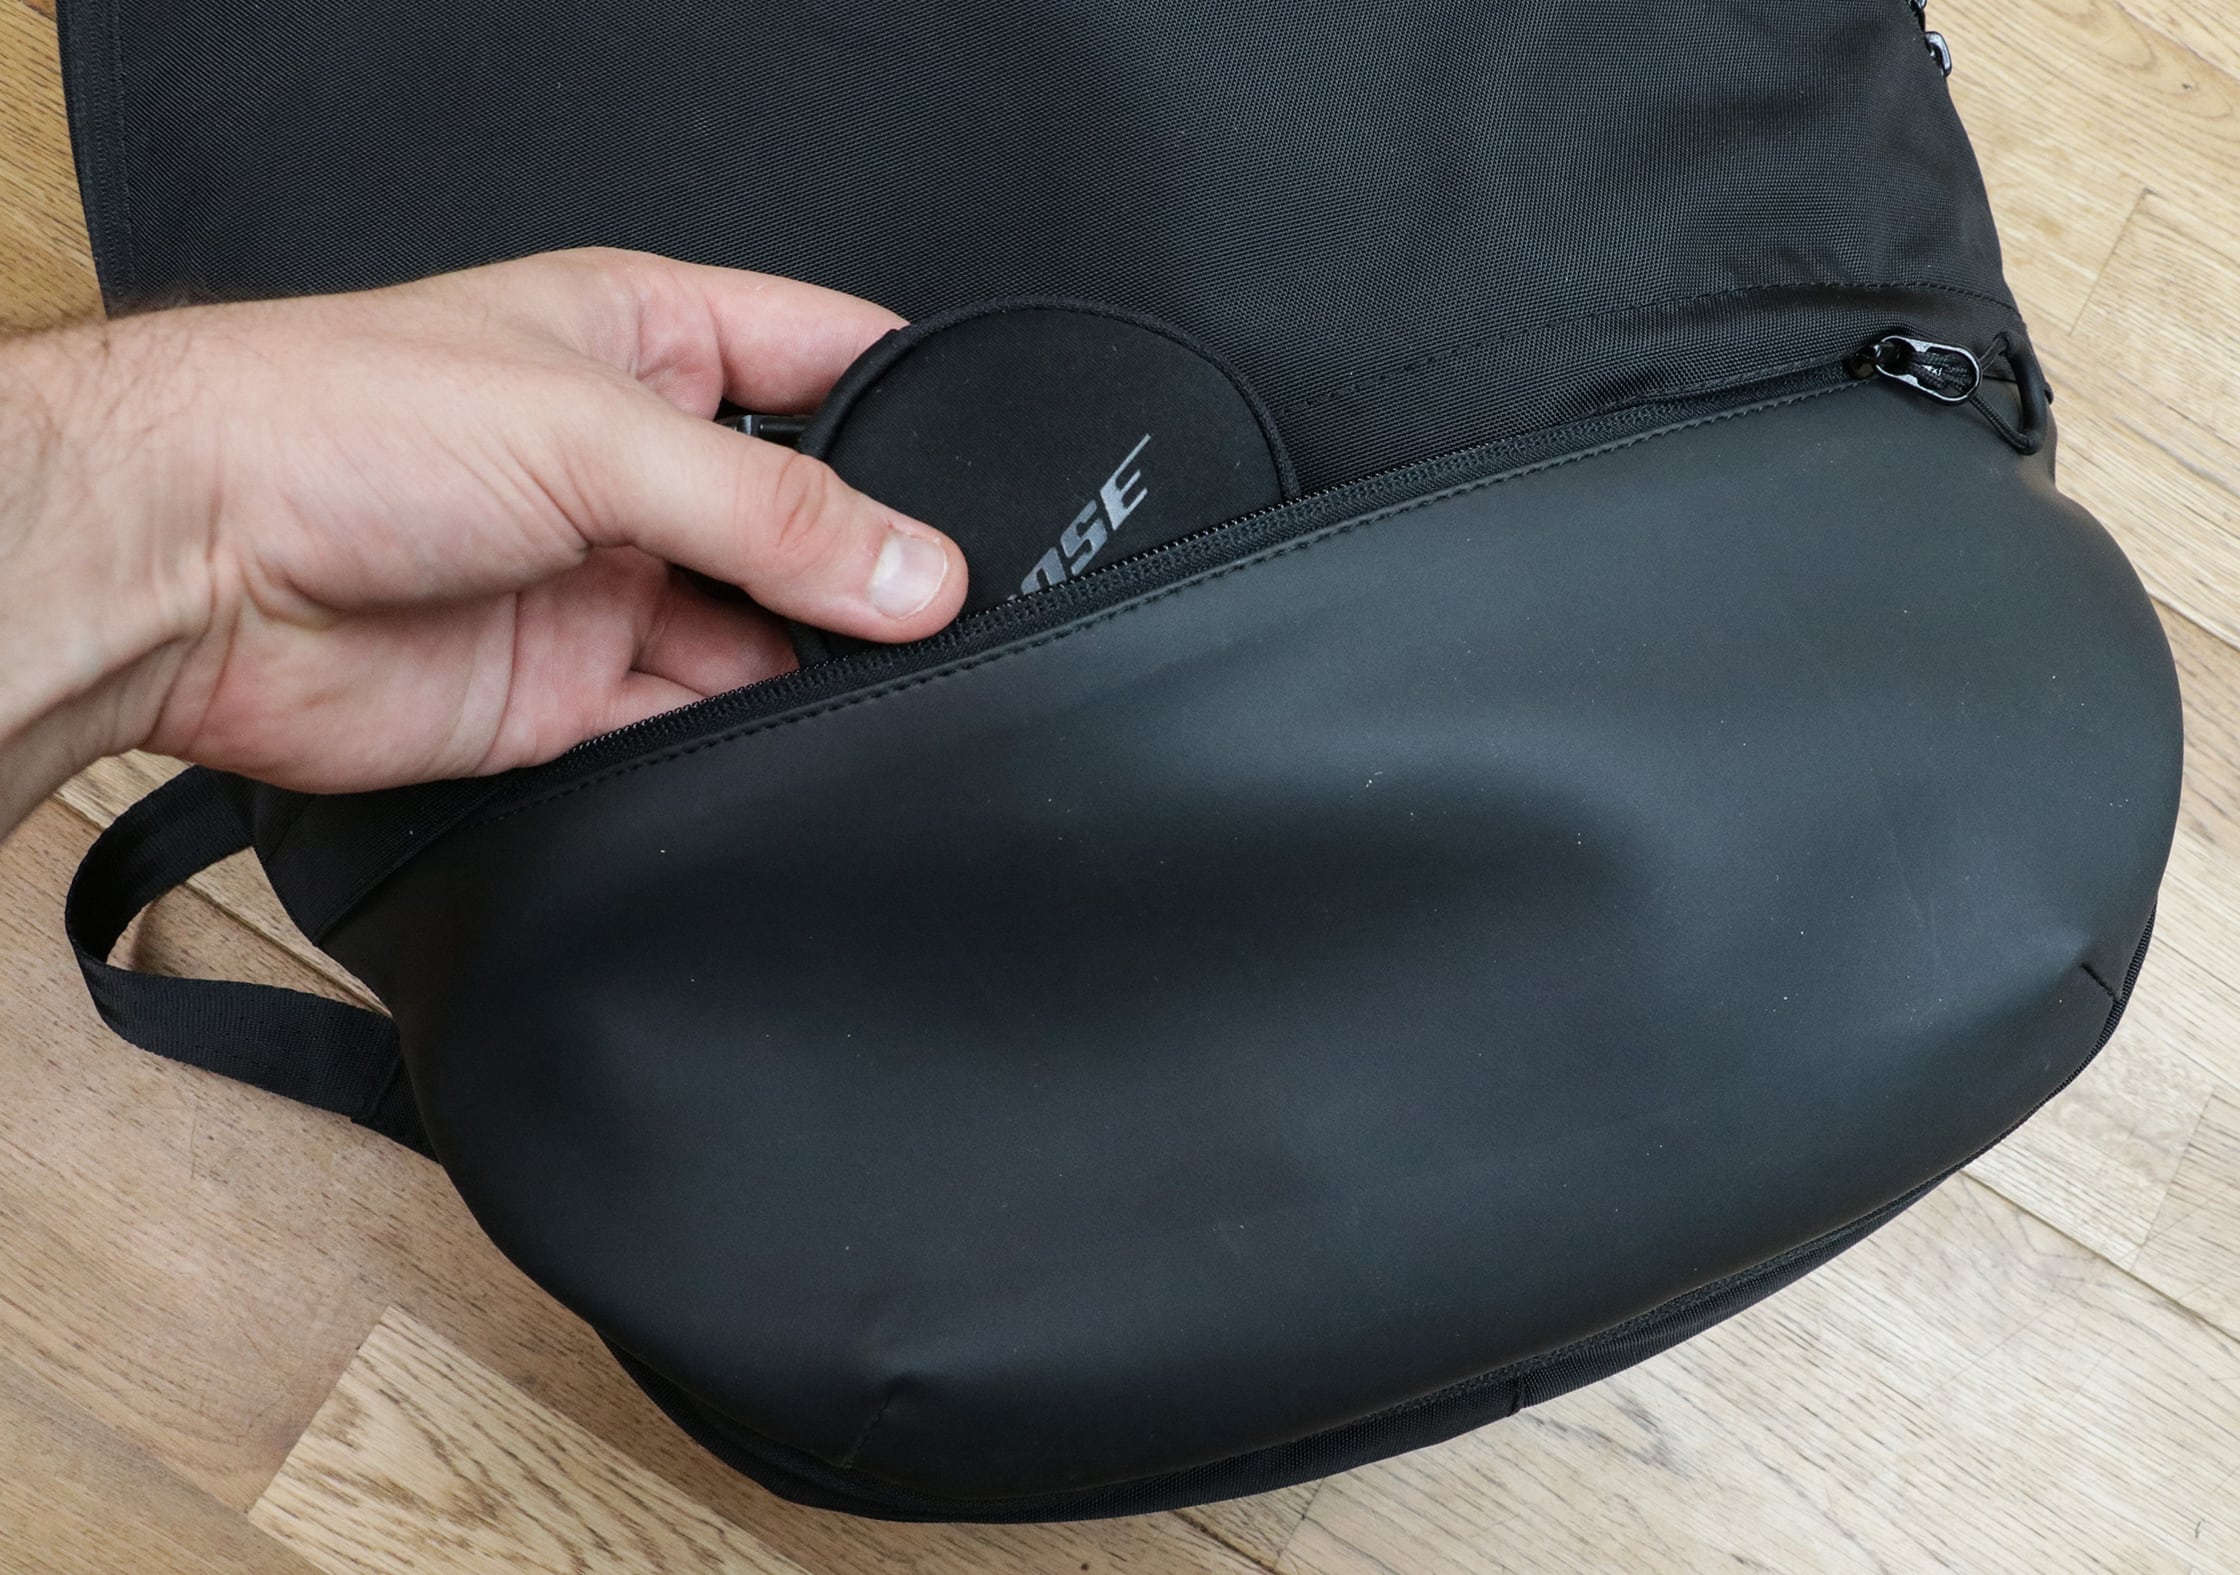 OPPOSETHIS Invisible Carry-On Front Quick-Grab Pocket At The Bottom